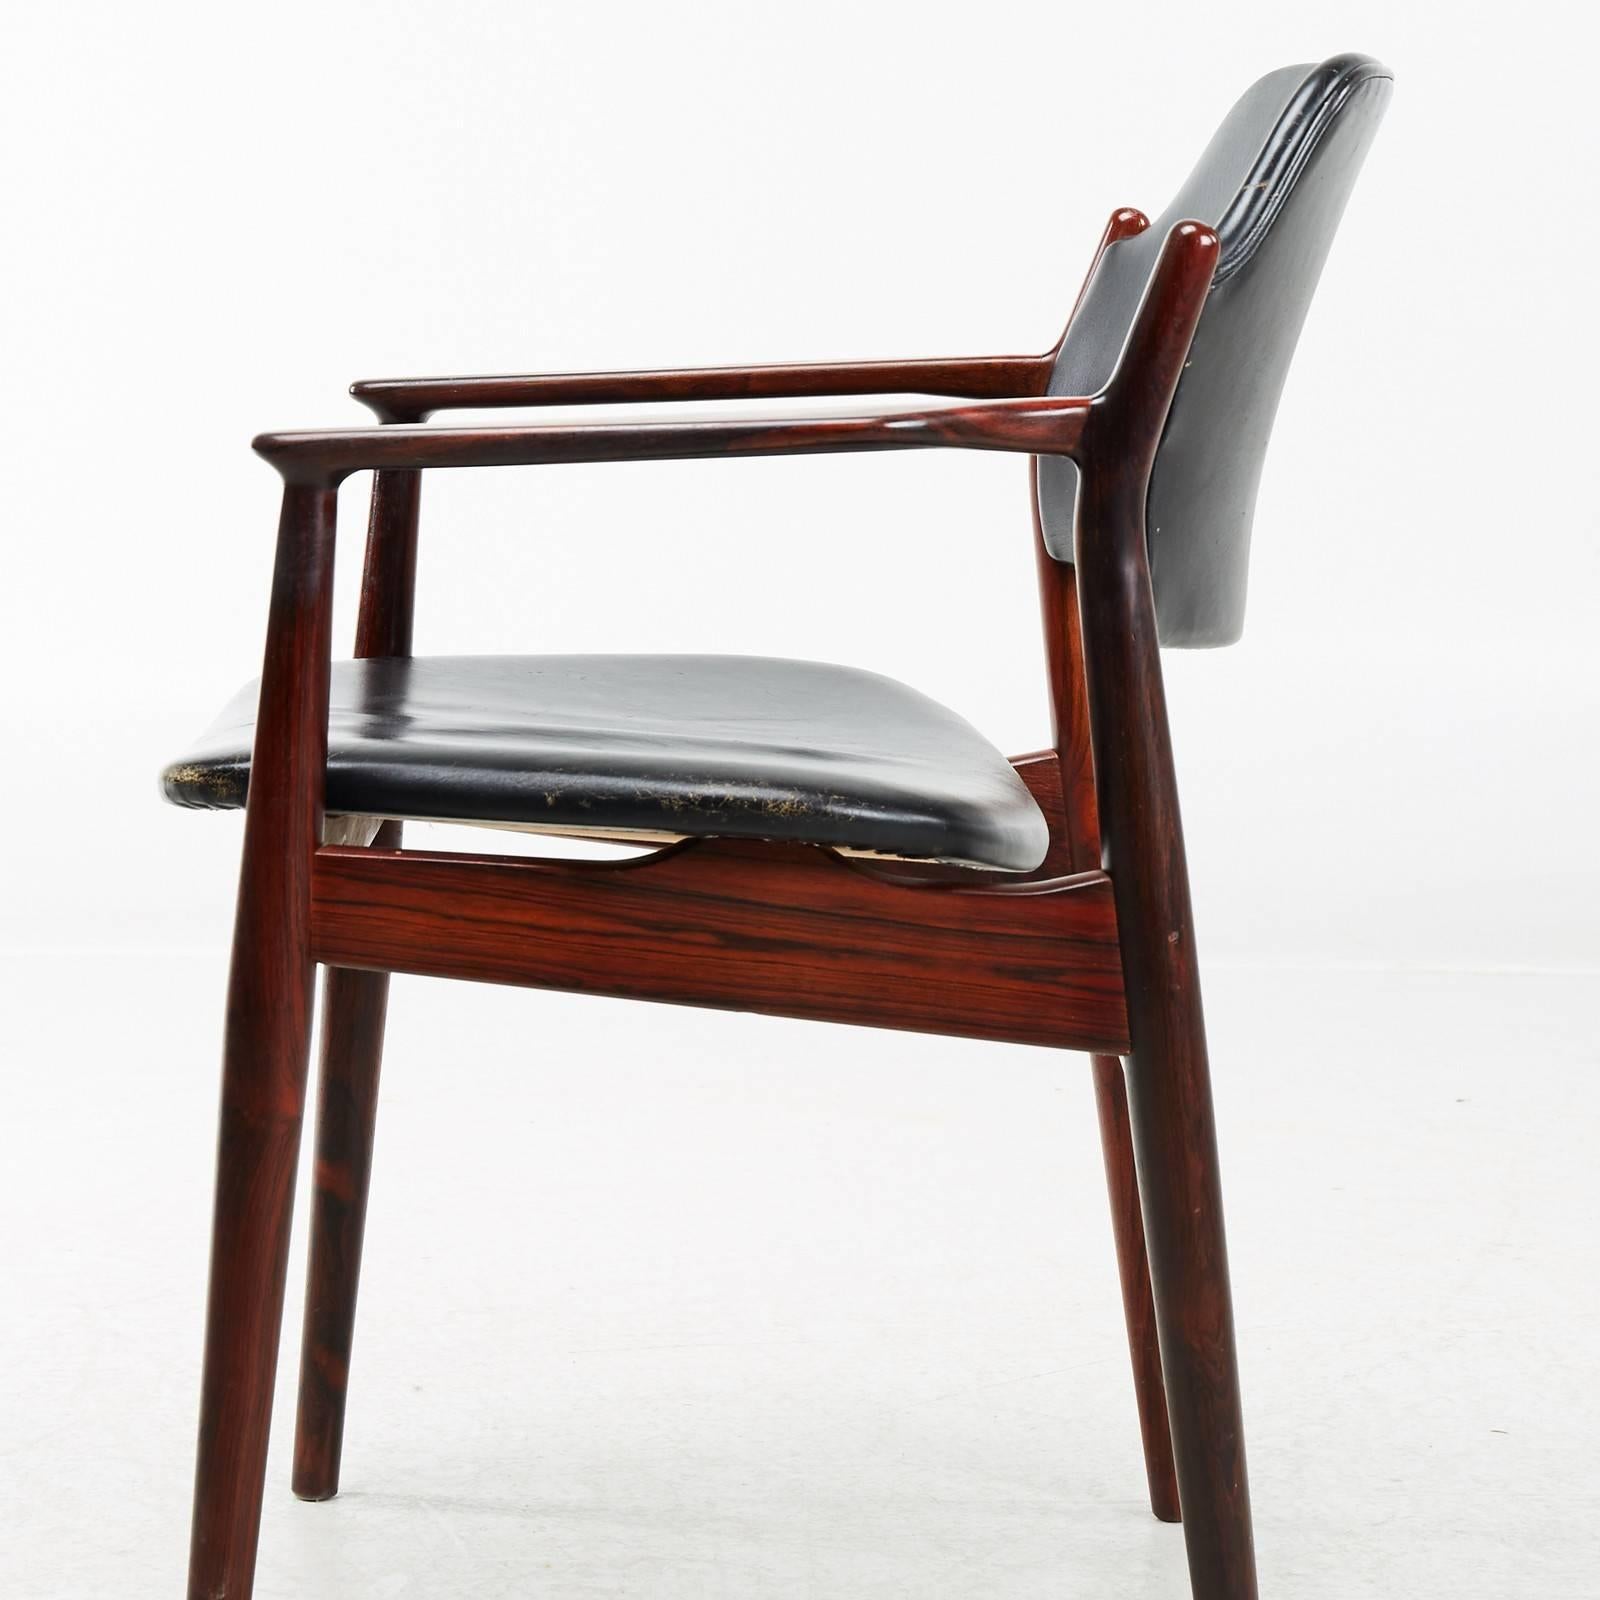 Arne Vodder rosewood armchairs by Sibast Møbler designed in 1961

The comfortable rosewood armchairs with their organic design have been checked and refinished by our cabinetmaker to ensure that they are in very good condition. The price includes